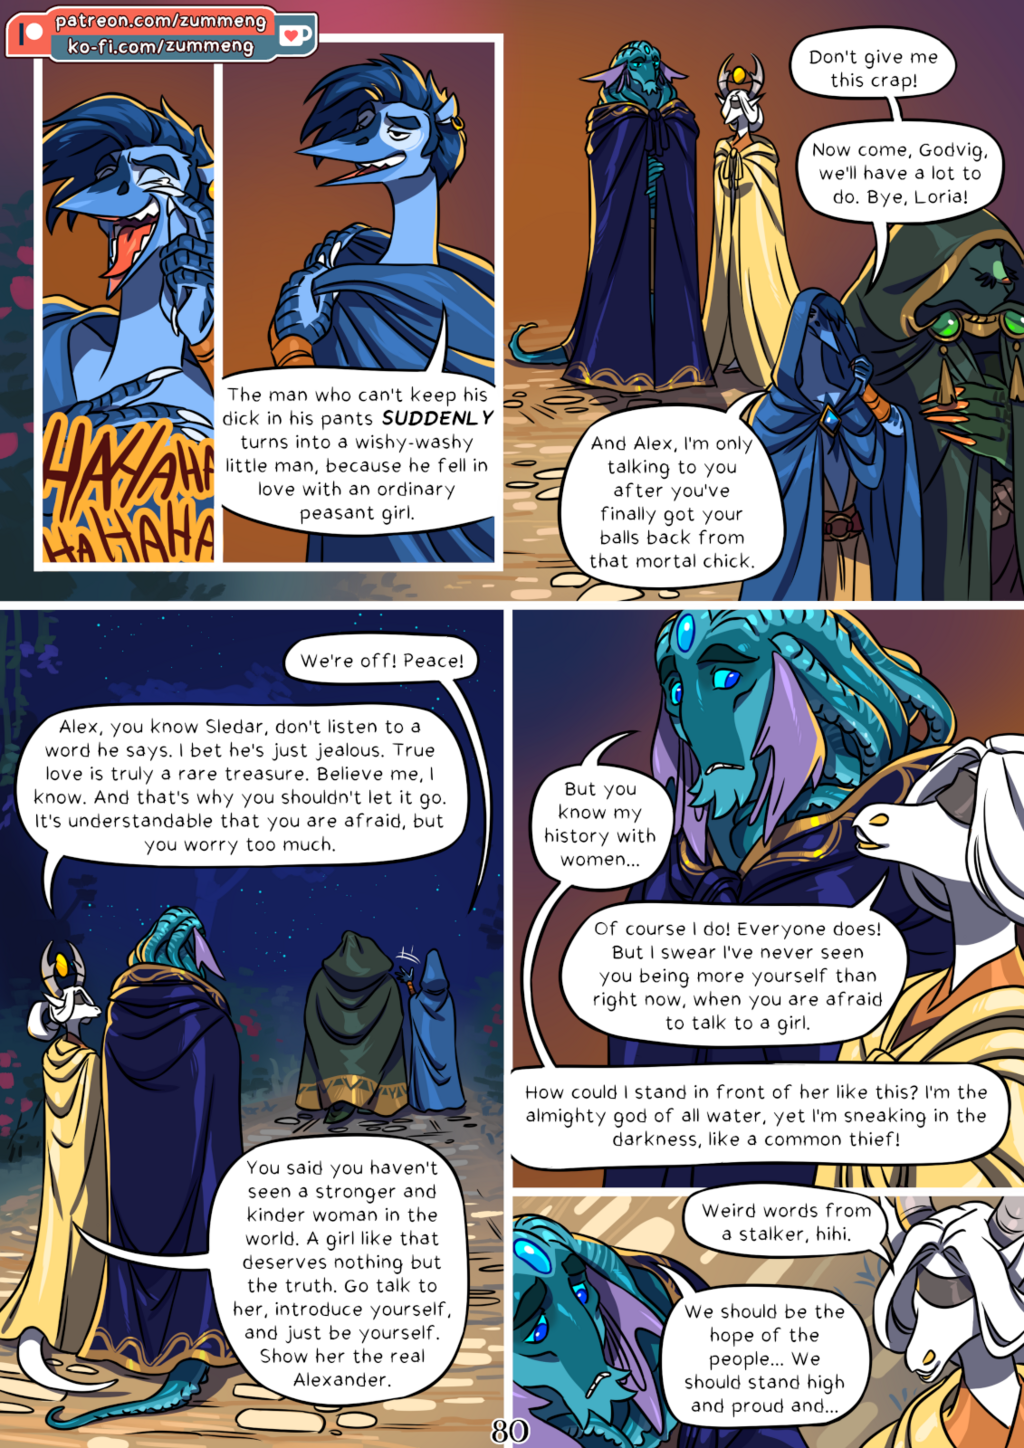 Tree of Life - Book 0 pg. 80.